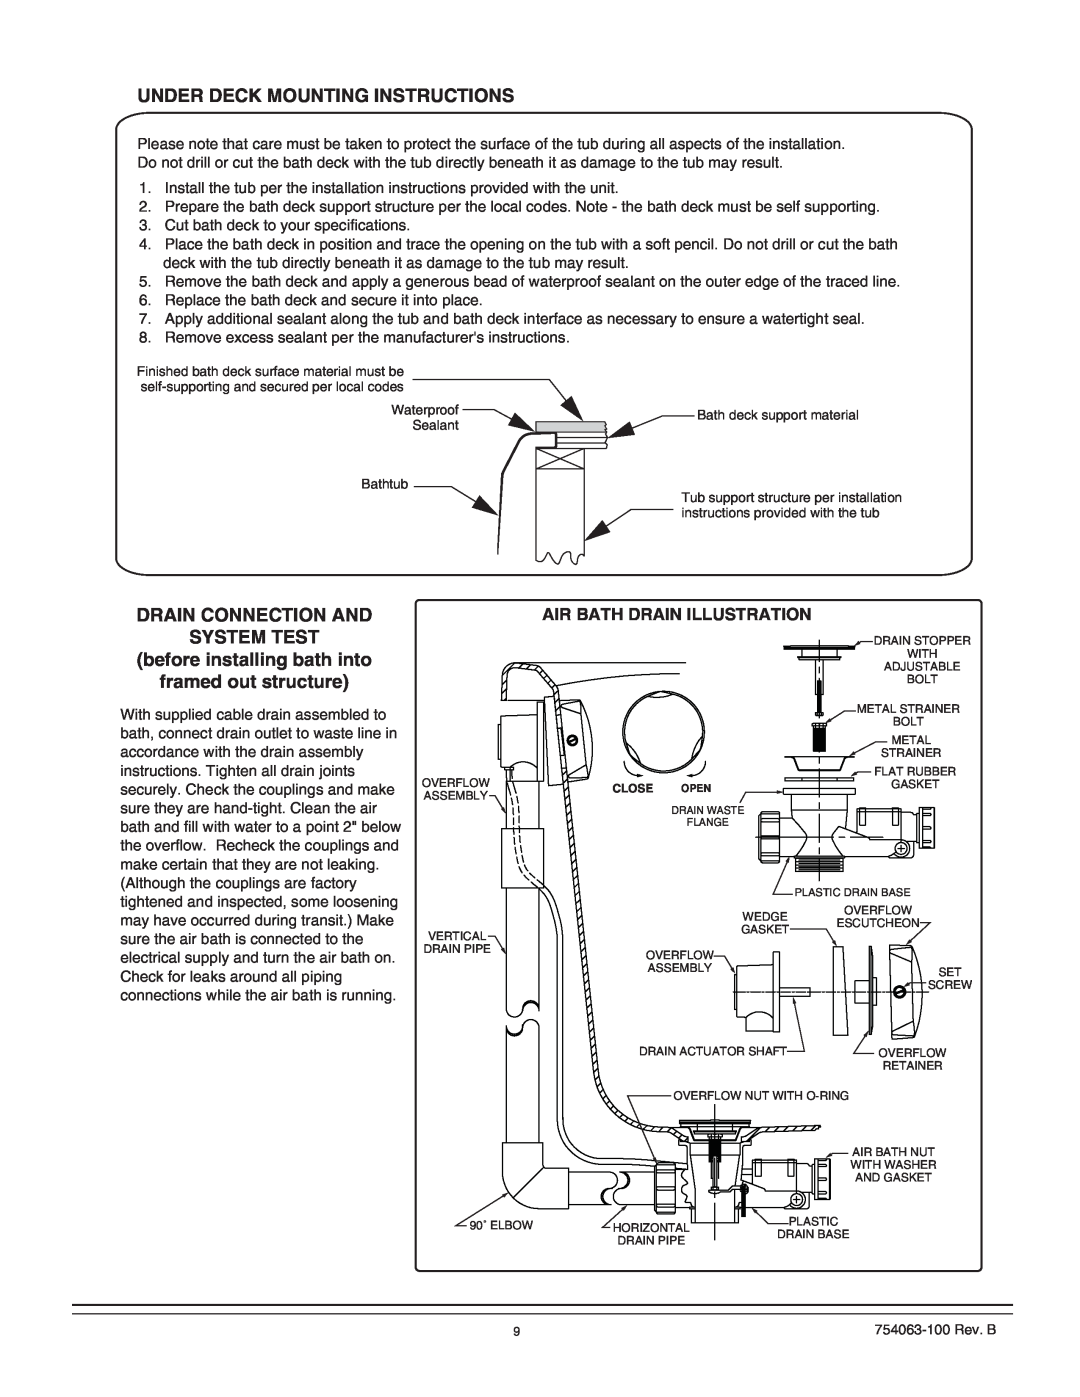 American Standard 3574 Under Deck Mounting Instructions, DRAIN CONNECTION AND SYSTEM TEST before installing bath into 